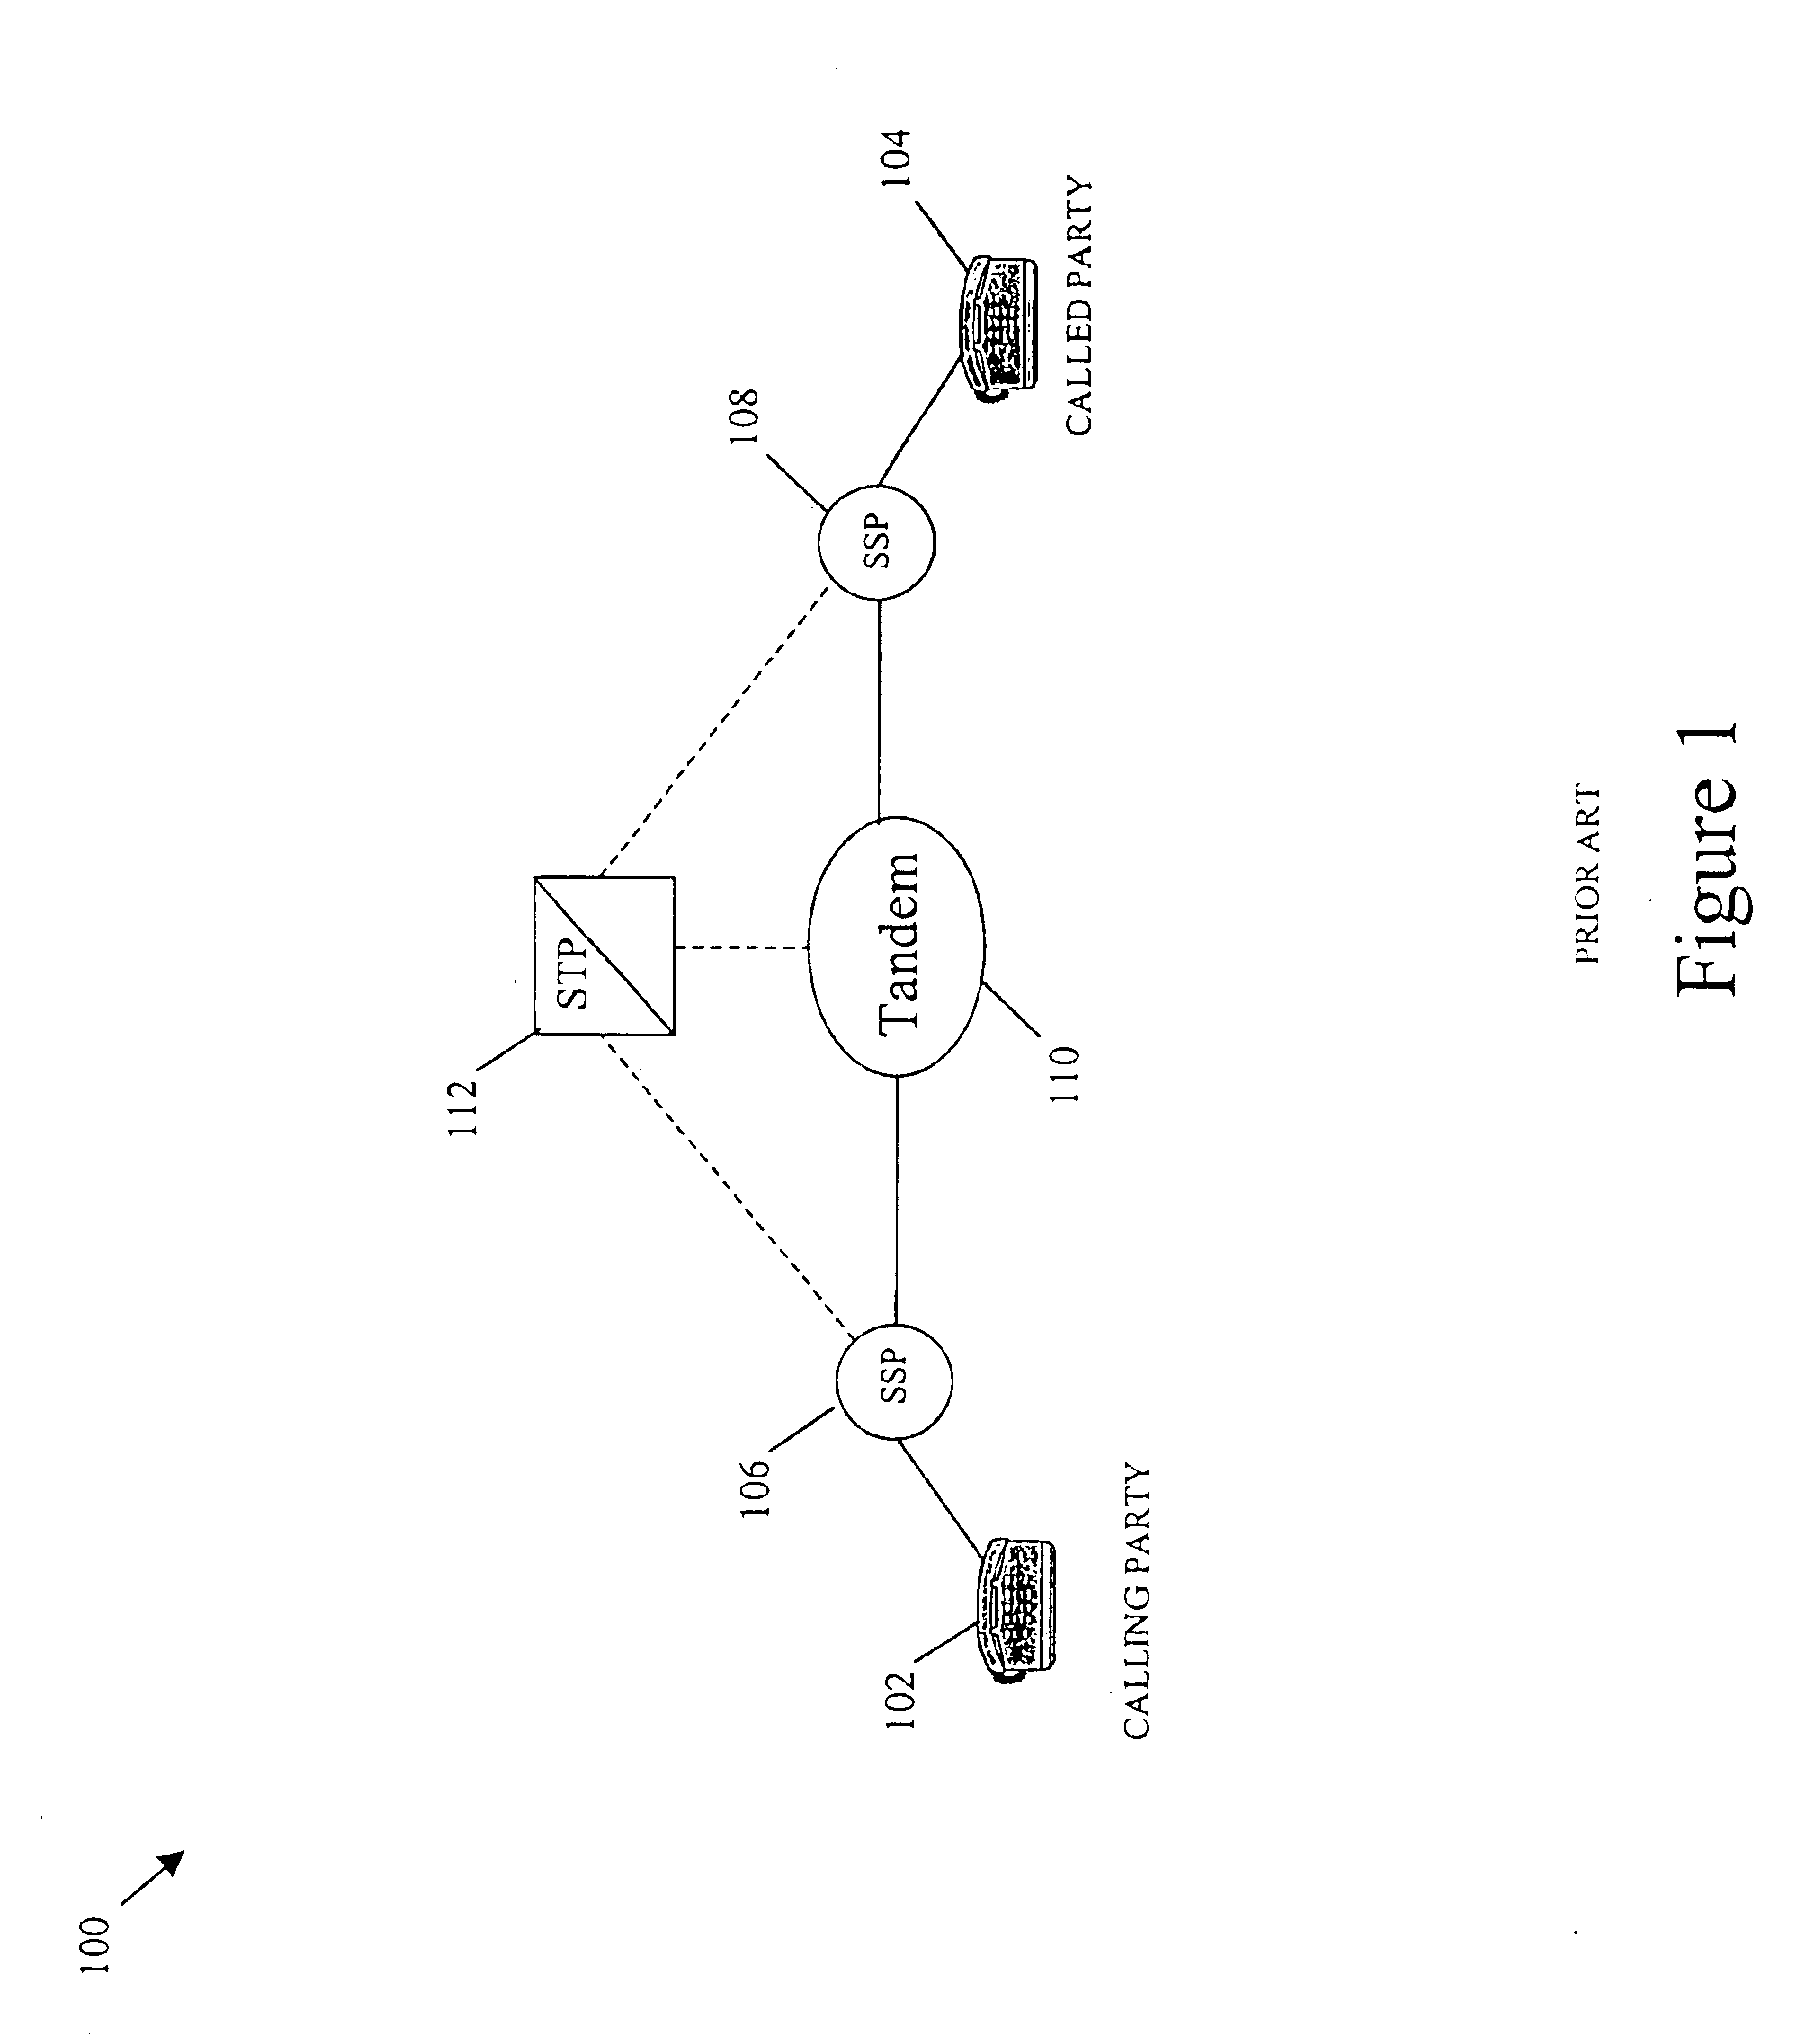 Methods and systems for routing signaling messages in a communications network using circuit identification code (CIC) information